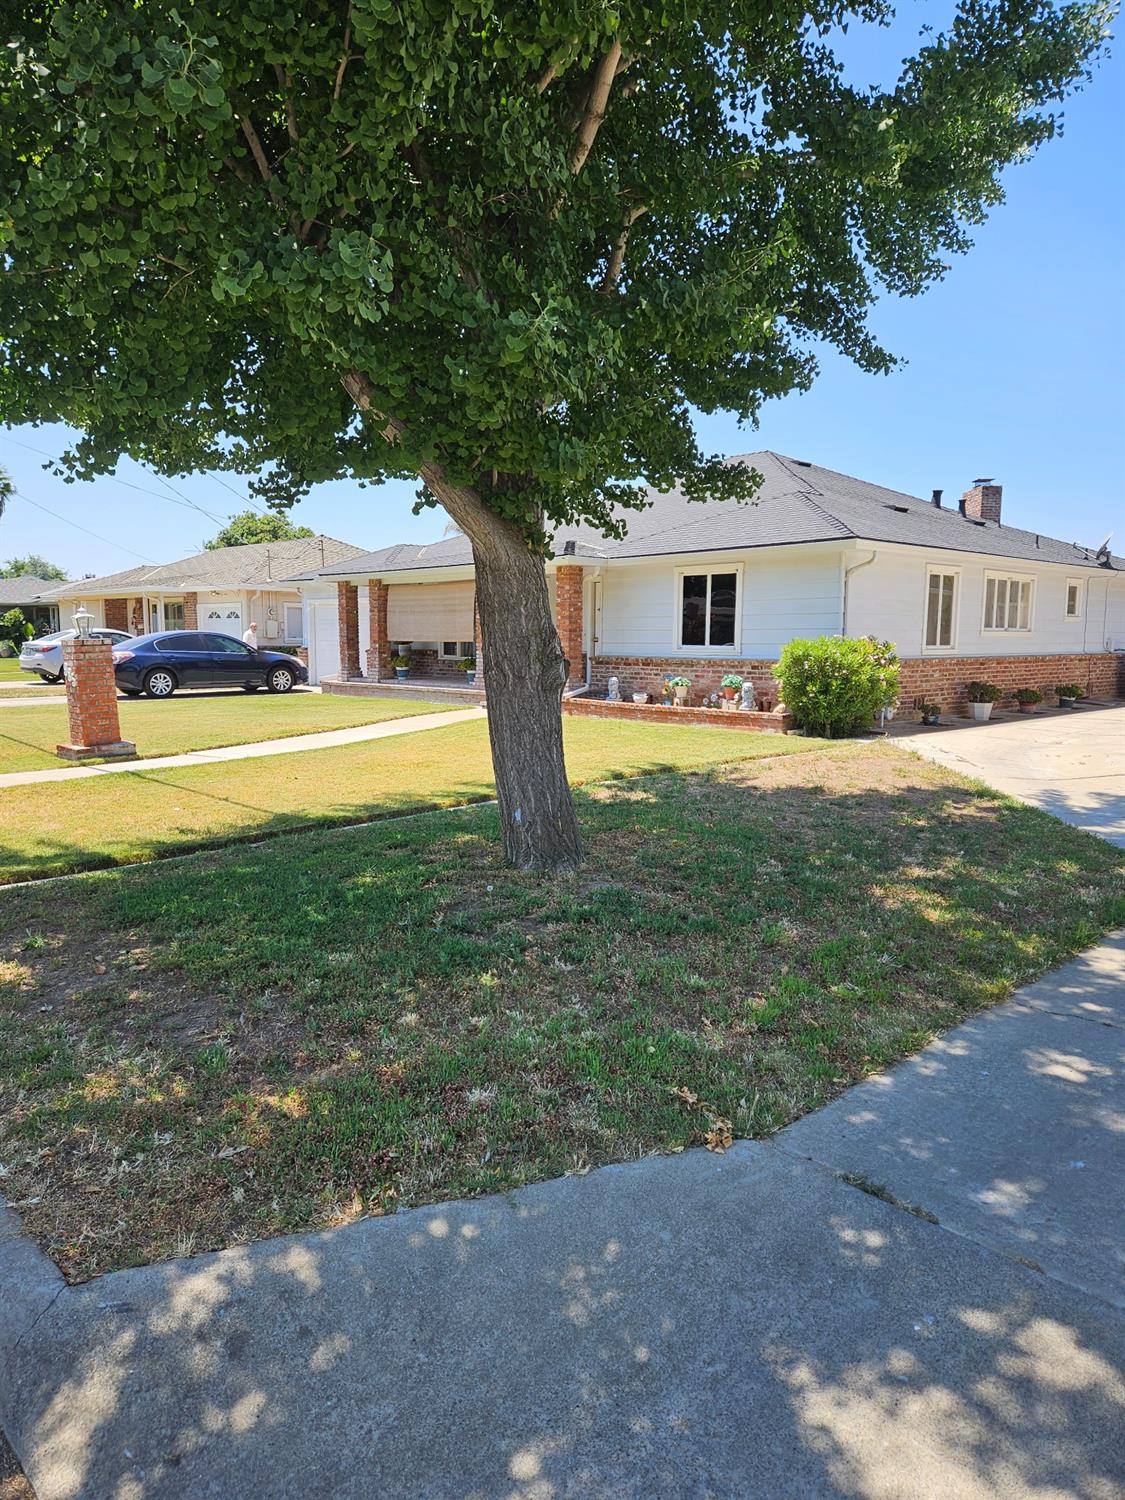 Photo of 985 Grove Ave in Gustine, CA